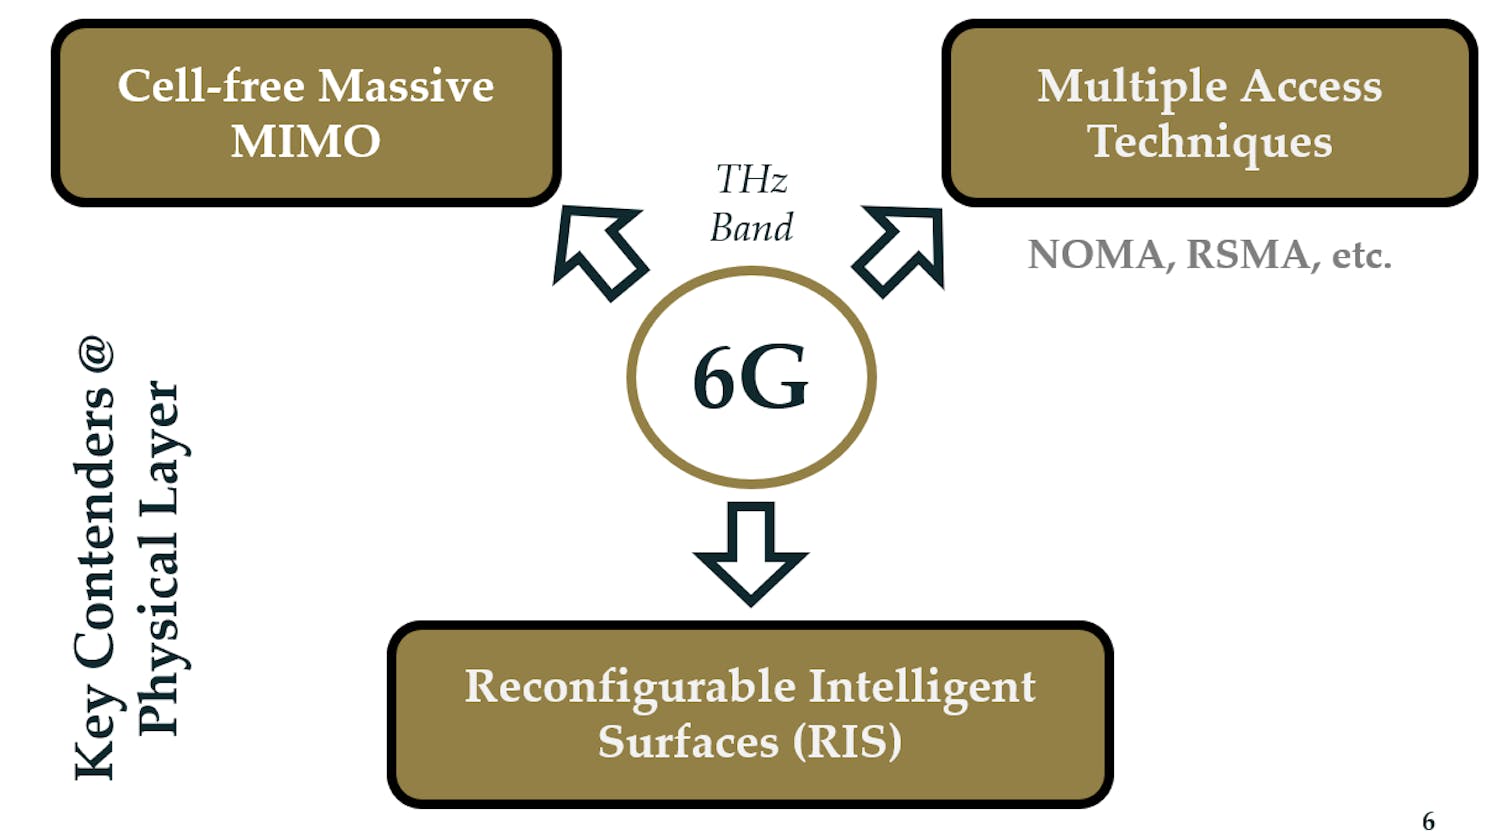 NOMA: Revolutionizing Connections in the 6G Era